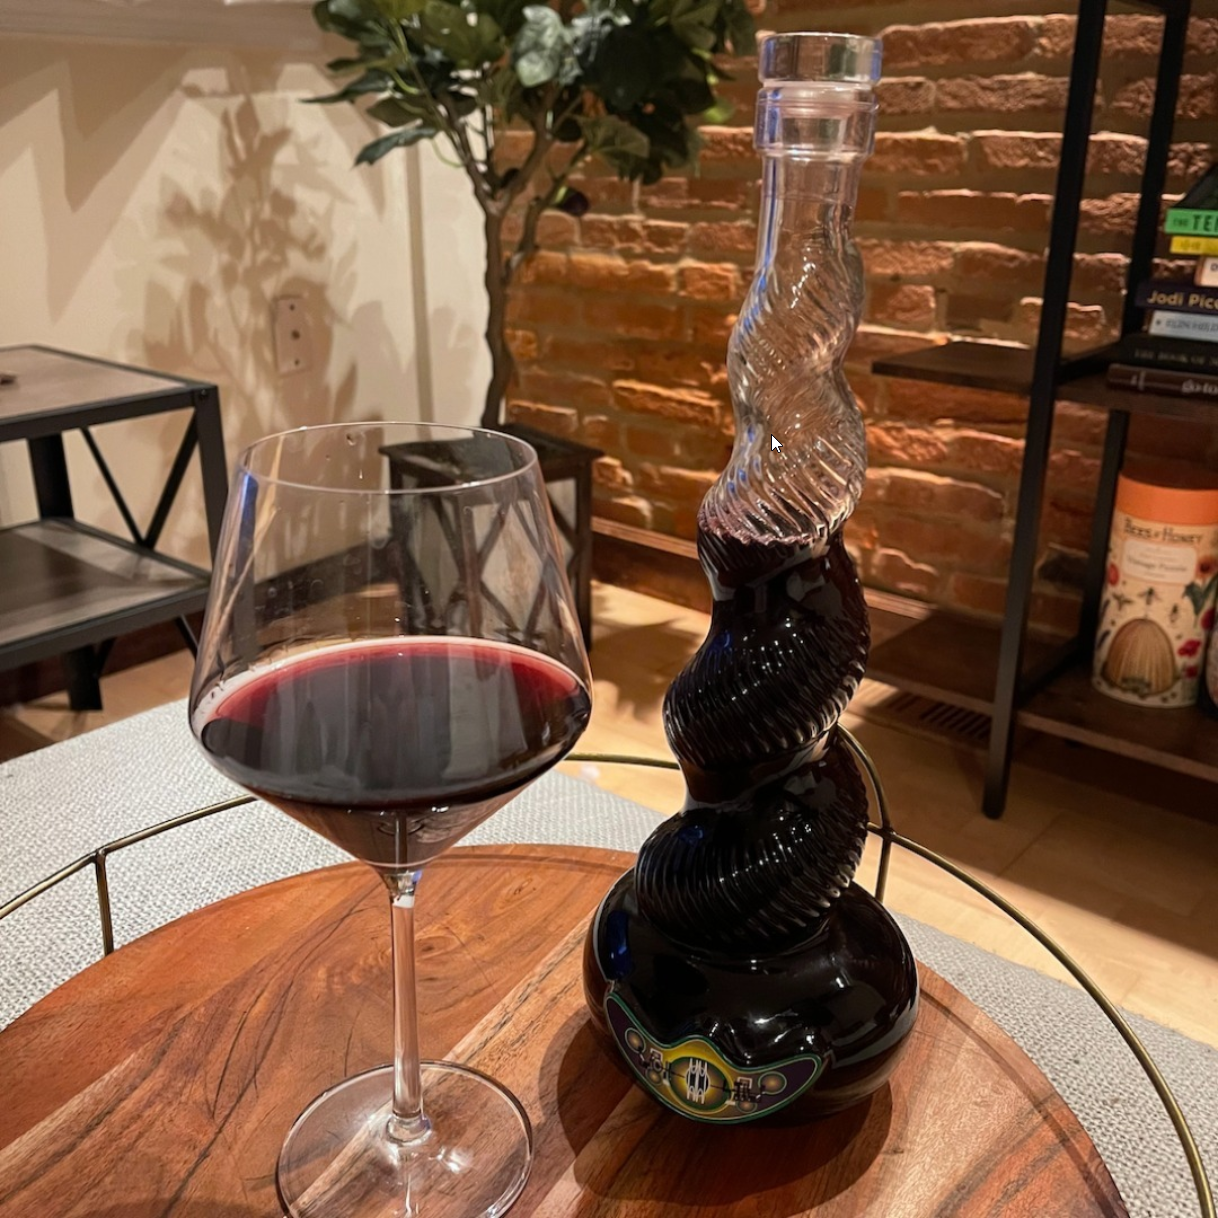 Red wine in a glass and red wine bottle